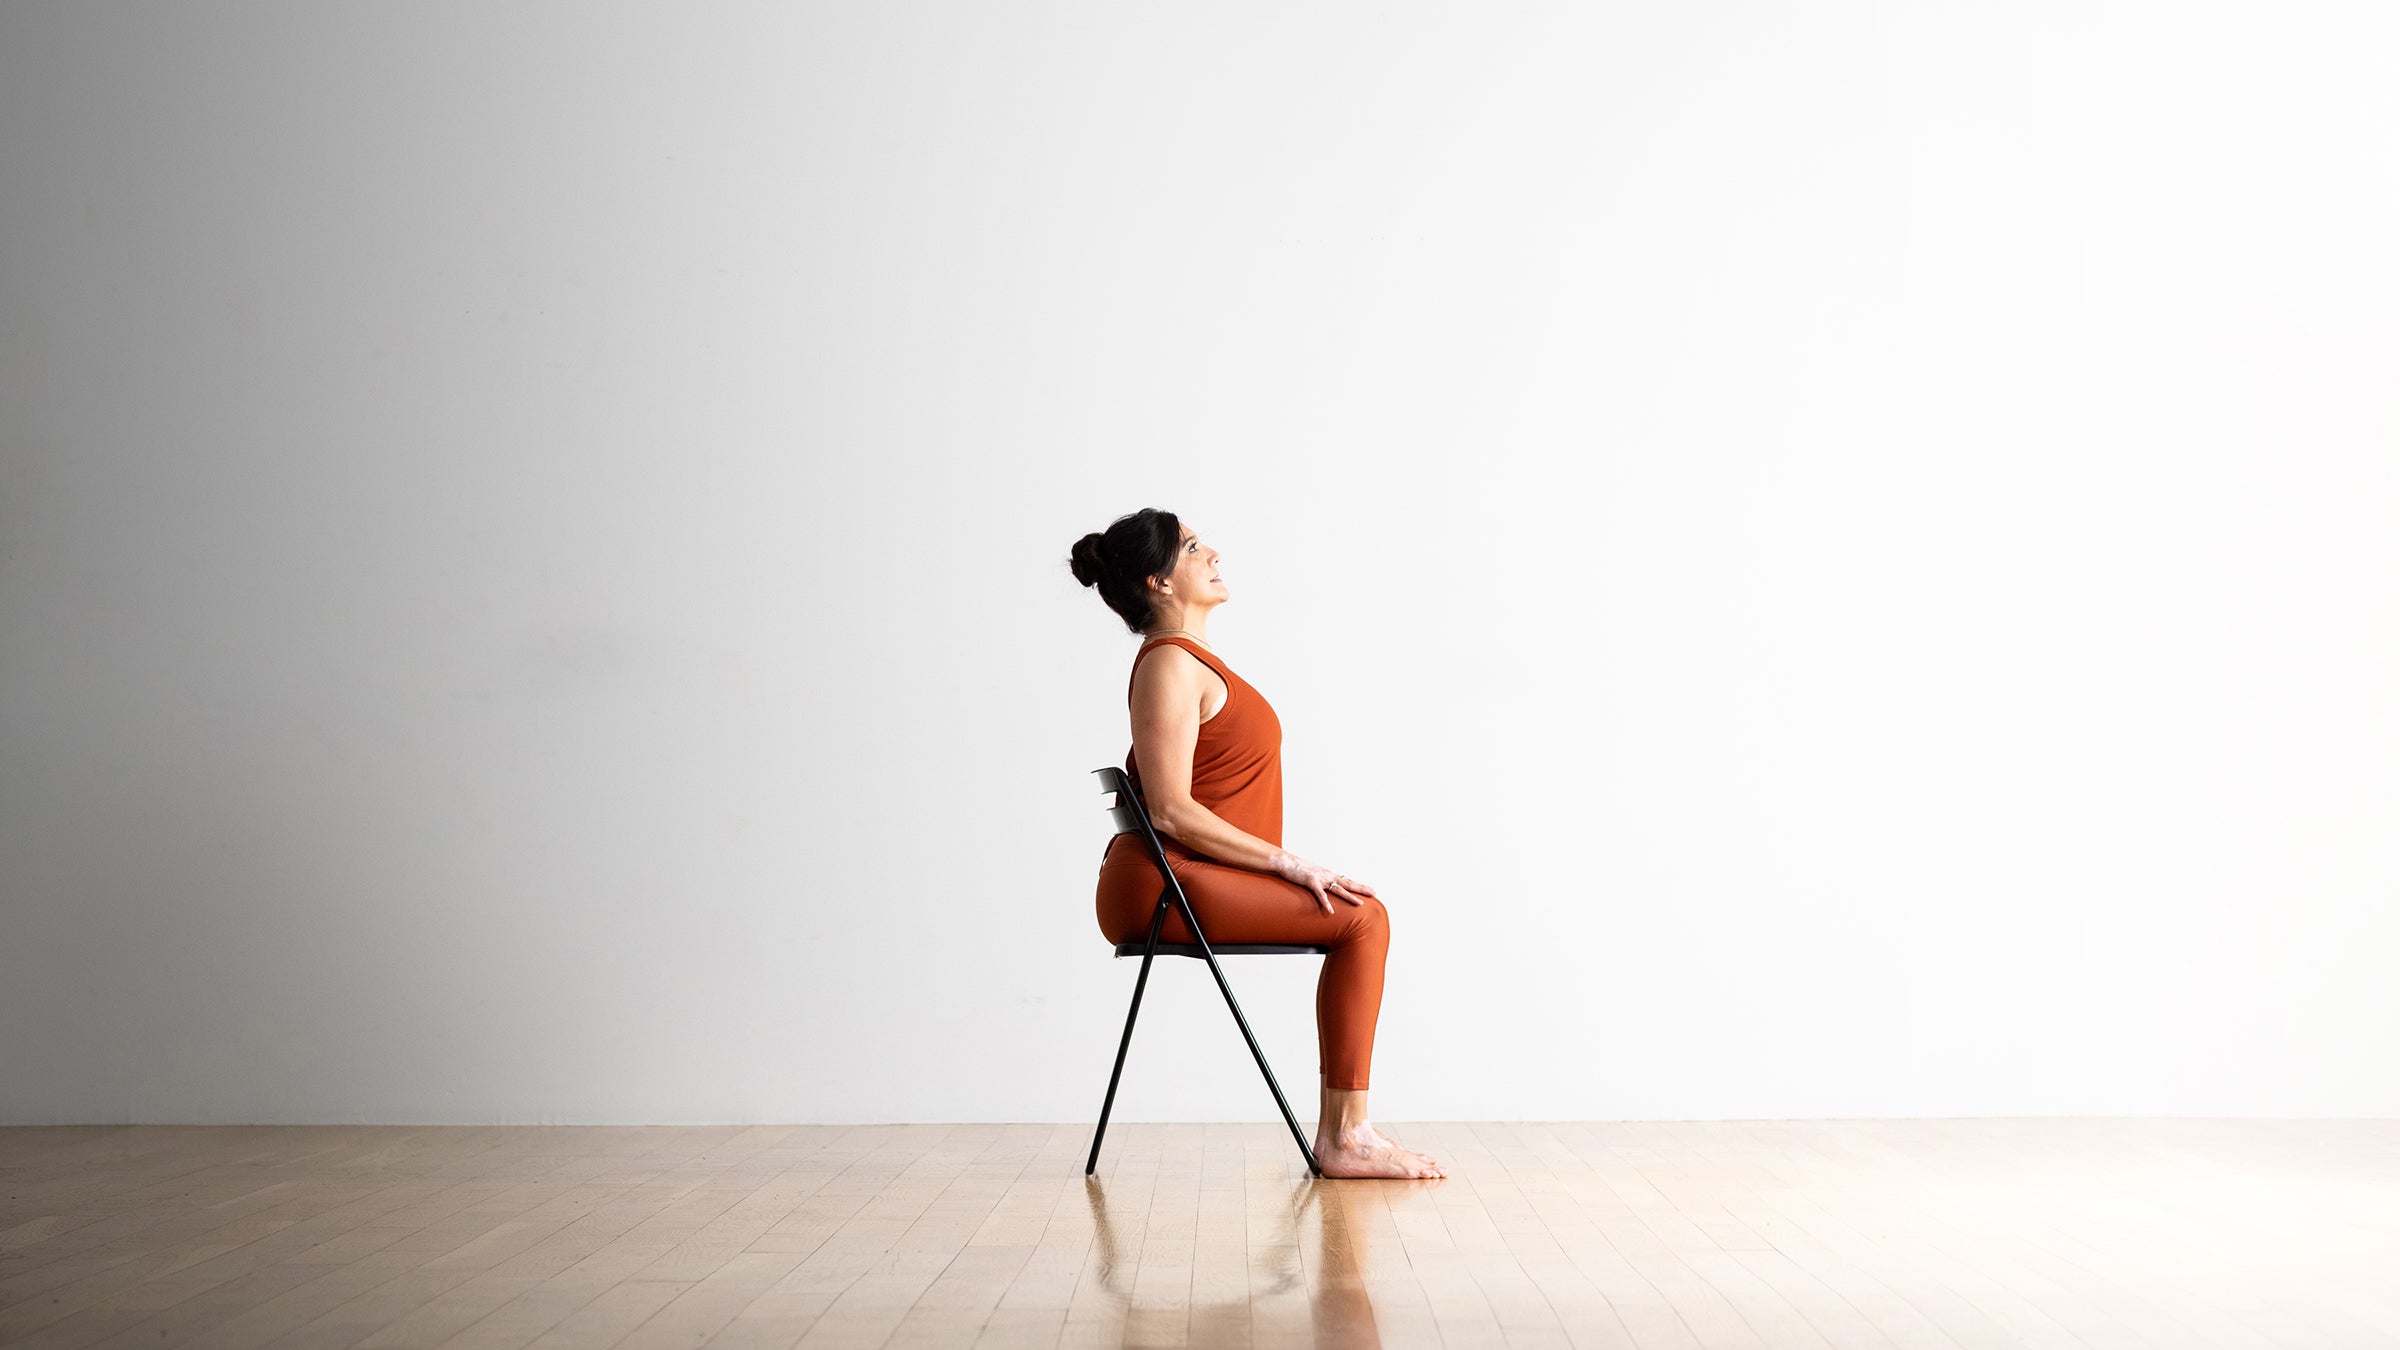 Glamorous leggy model dressed in an evening cocktail dress poses on a chair  playfully showing off a flexible body - Stock Image - Everypixel